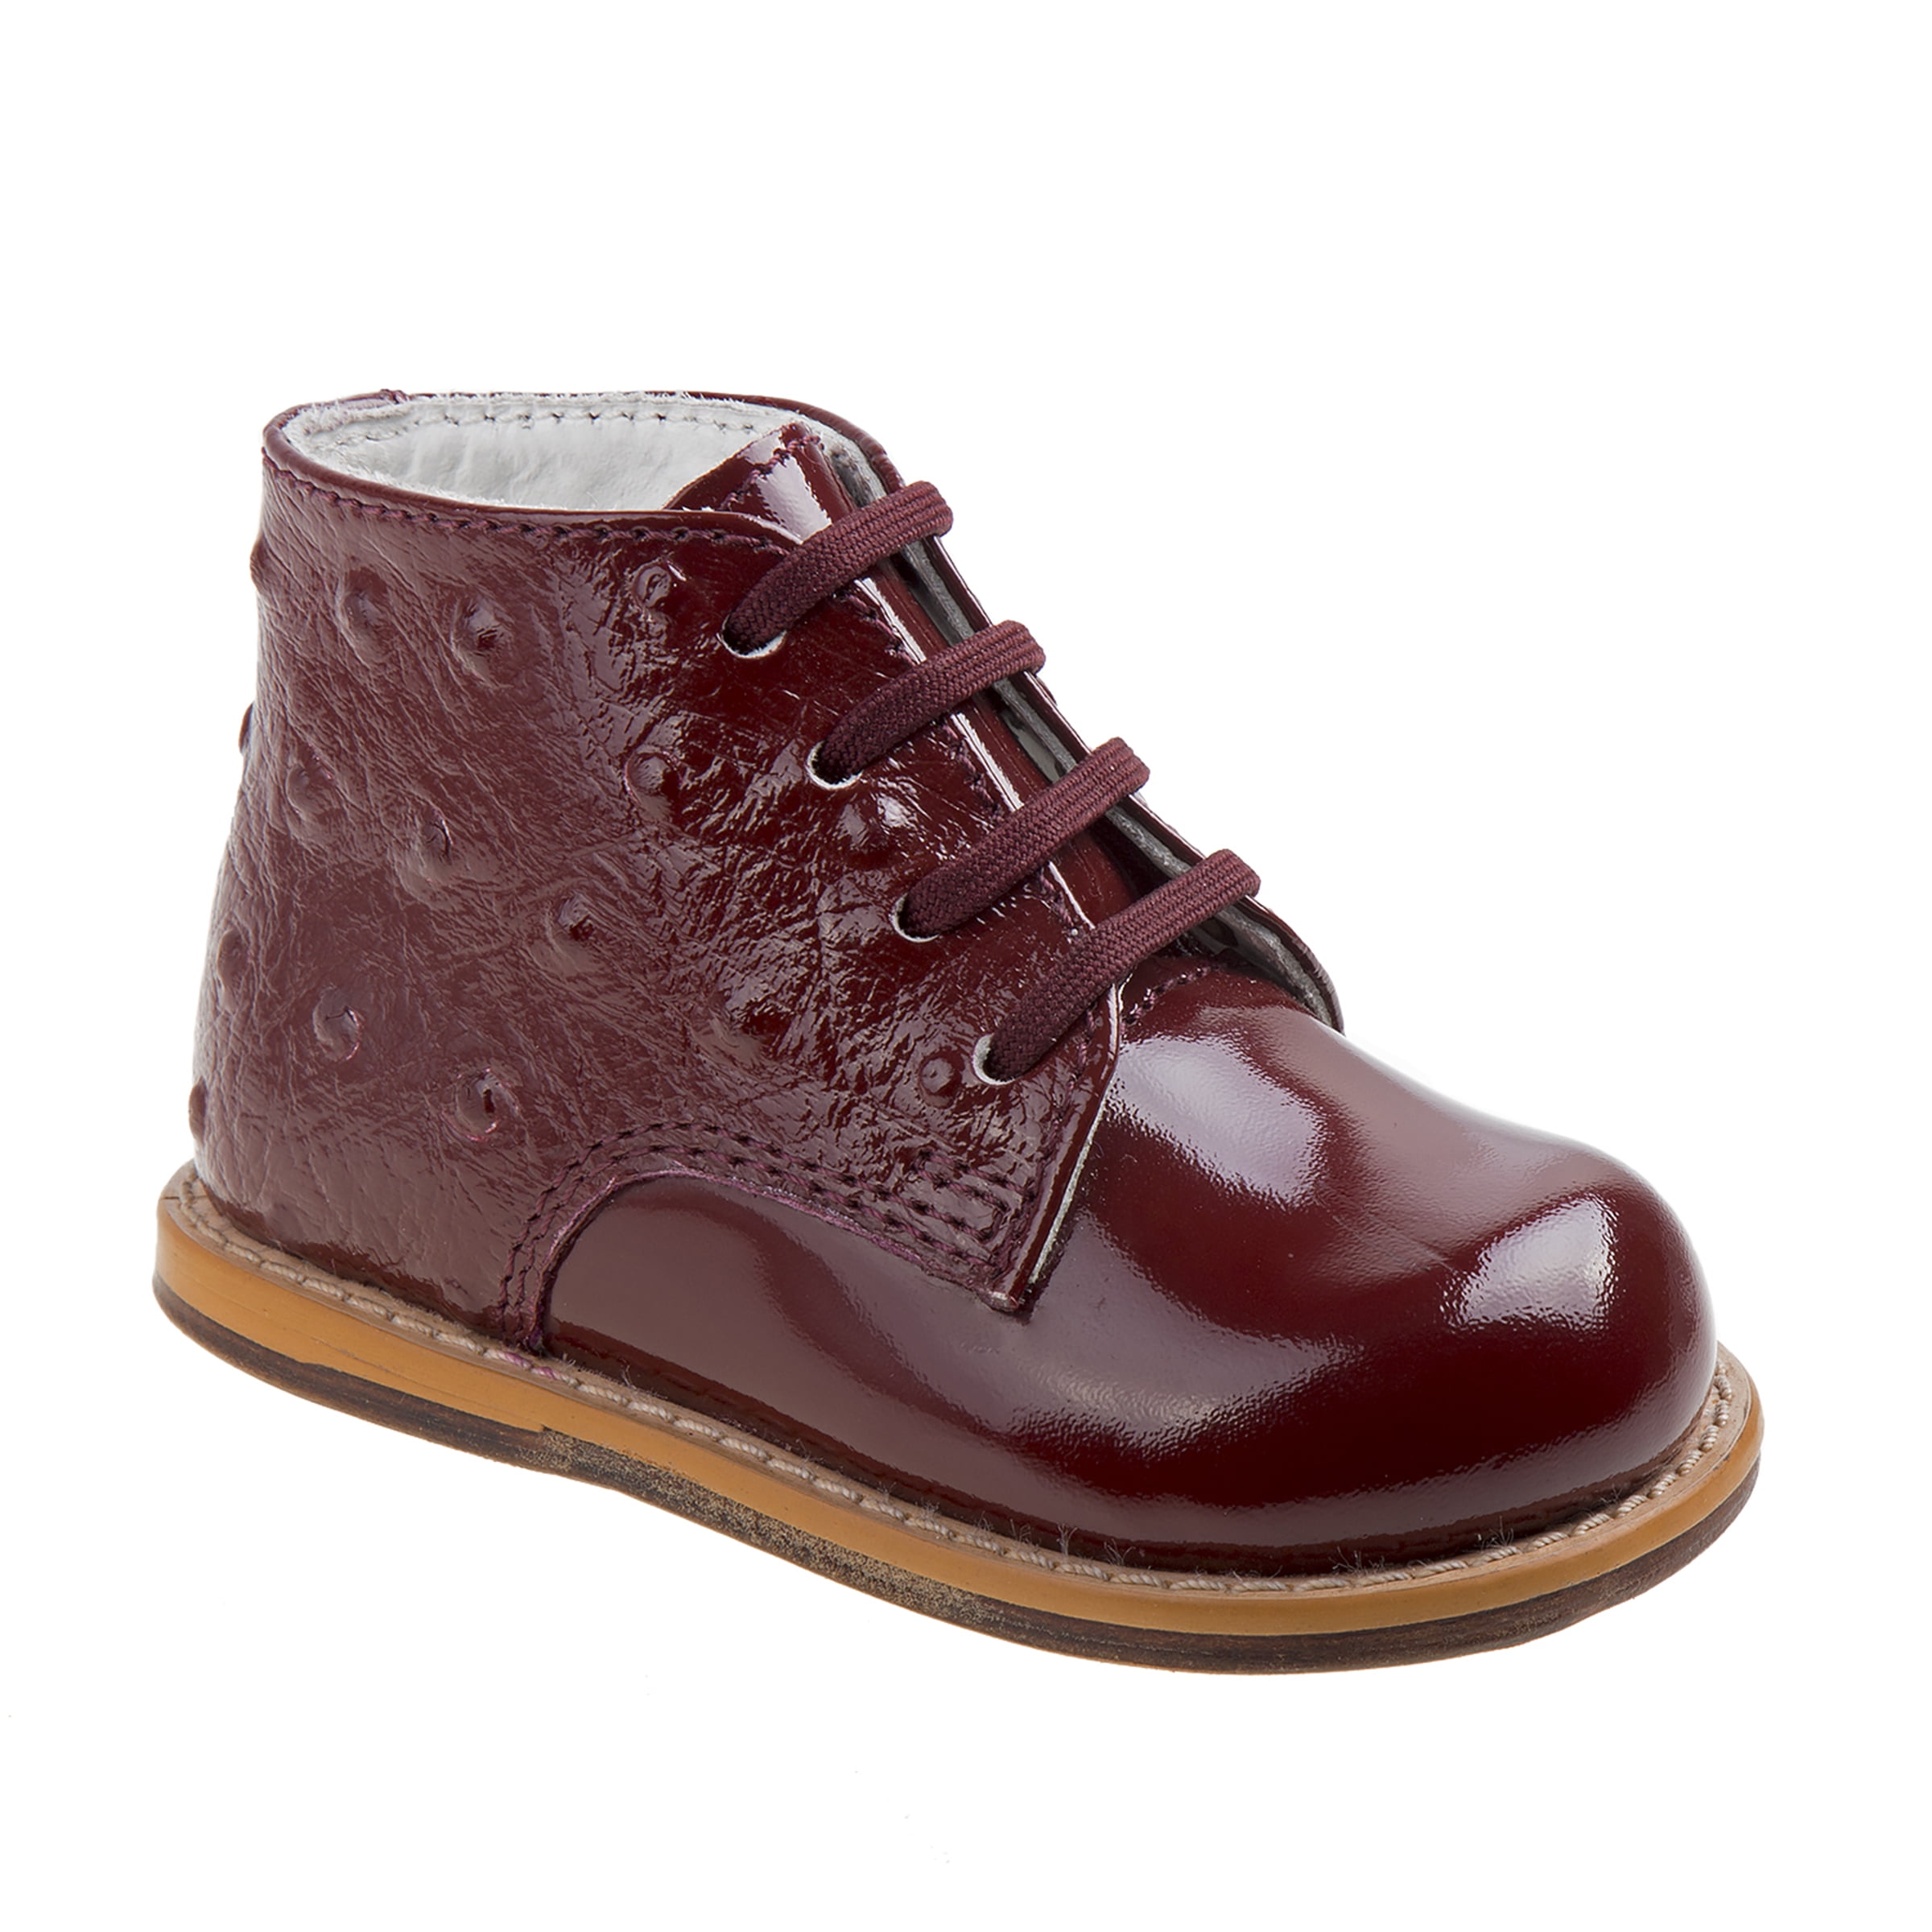 Josmo 2-8 Patent Ostrich Walking Shoes Burgundy Patent Ostrich, 2 